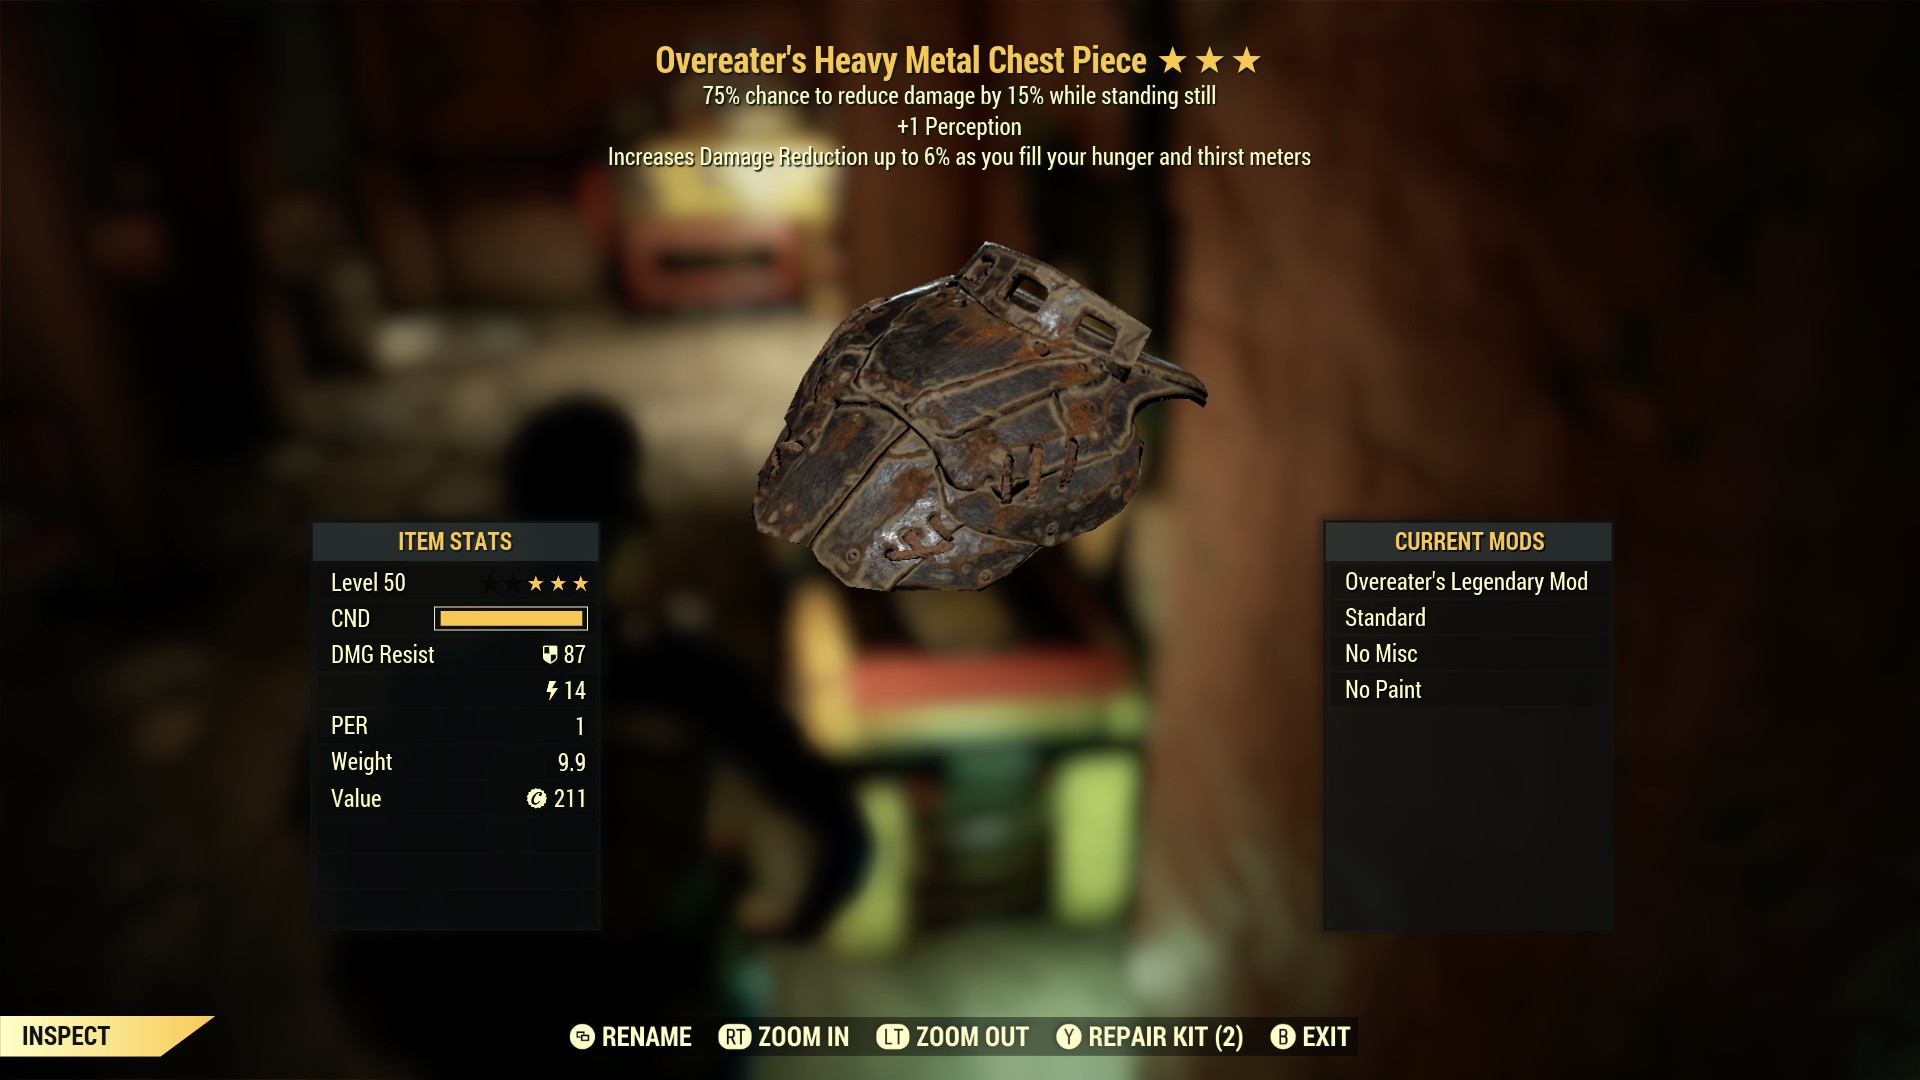 Overeater's Heavy Metal Chest Piece